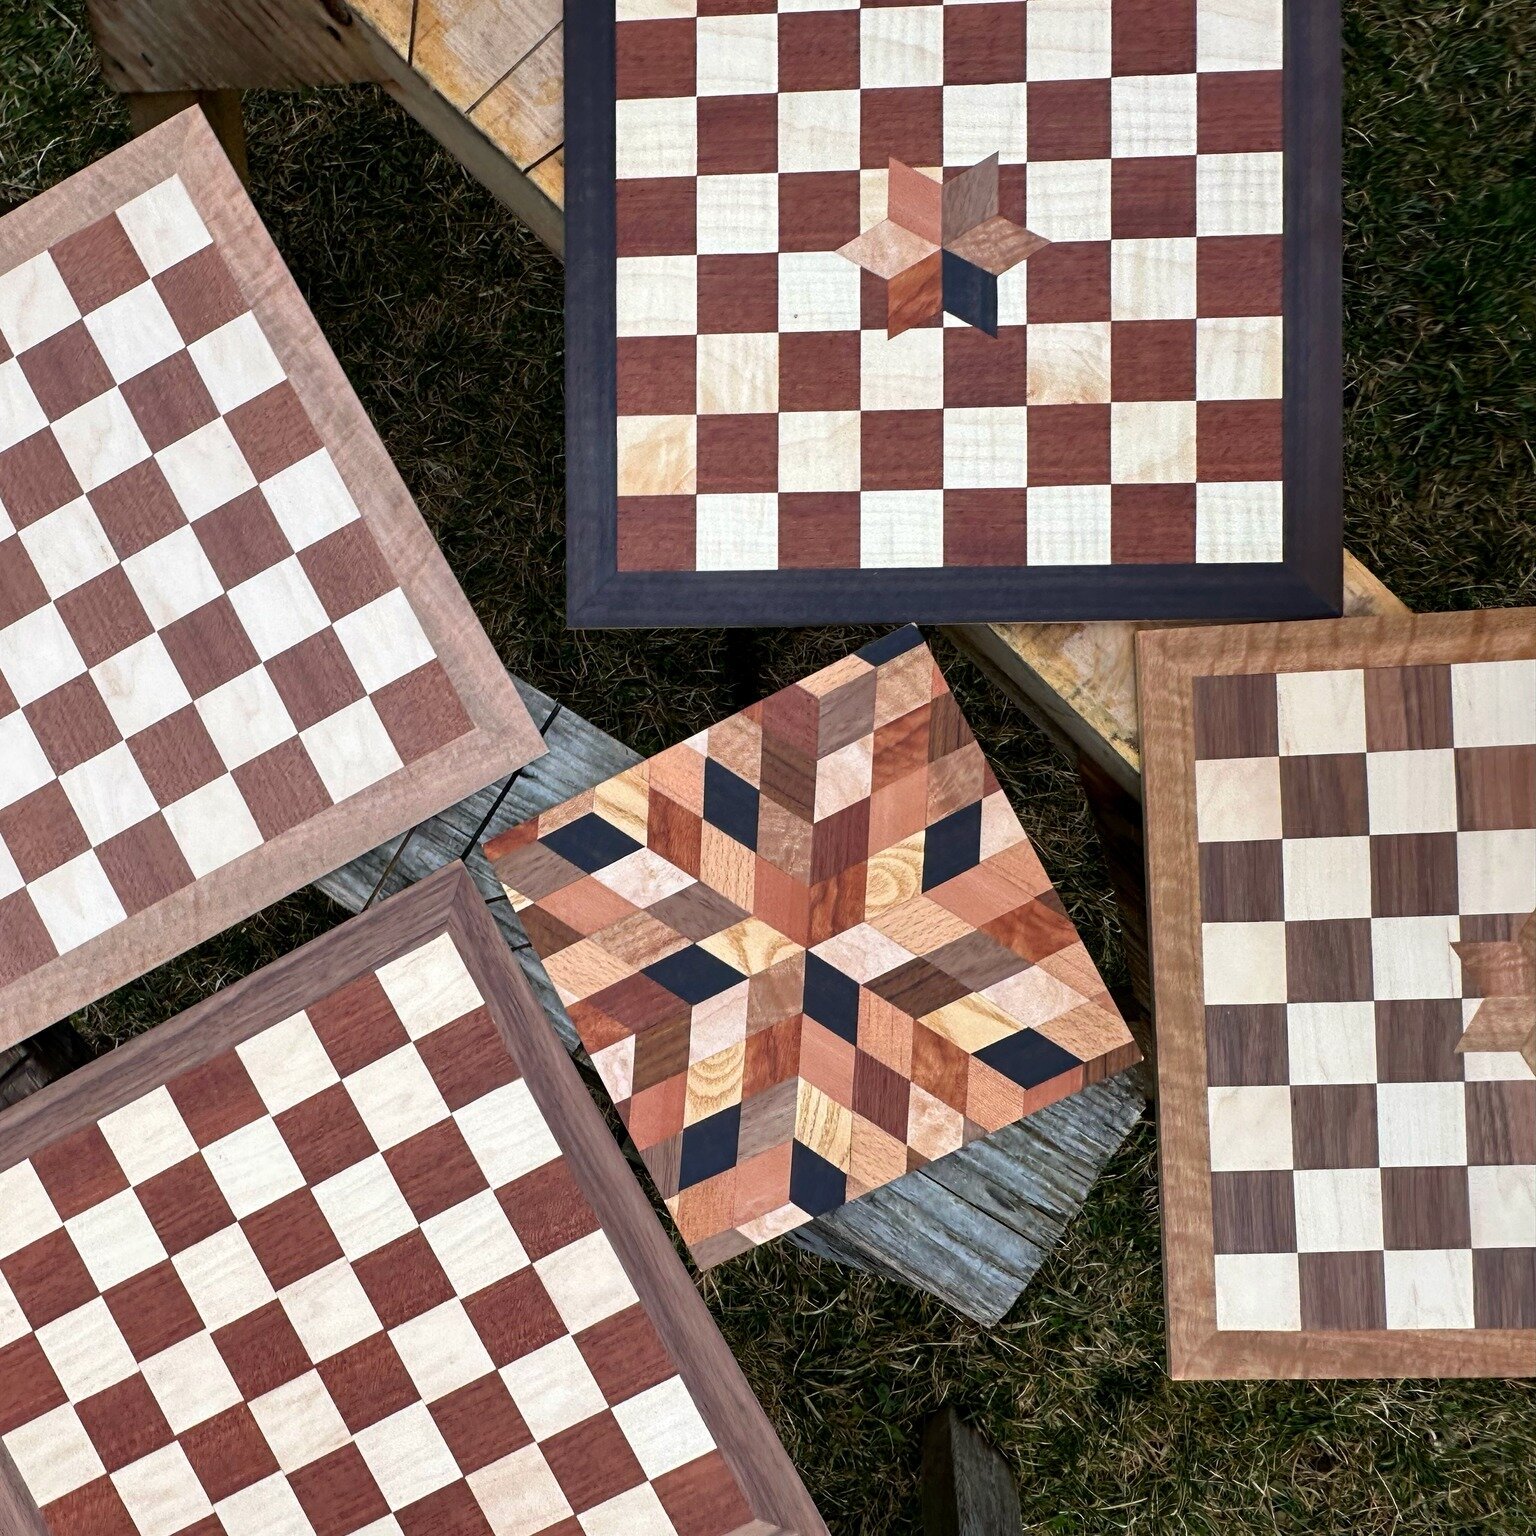 Gorgeous work from Intro to Parquetry last week! Students got to choose veneer from a variety of wood species then learned to cut and assemble pieces into geometric patterns. 

Once patterns were fully laid out and taped together as one unit, student